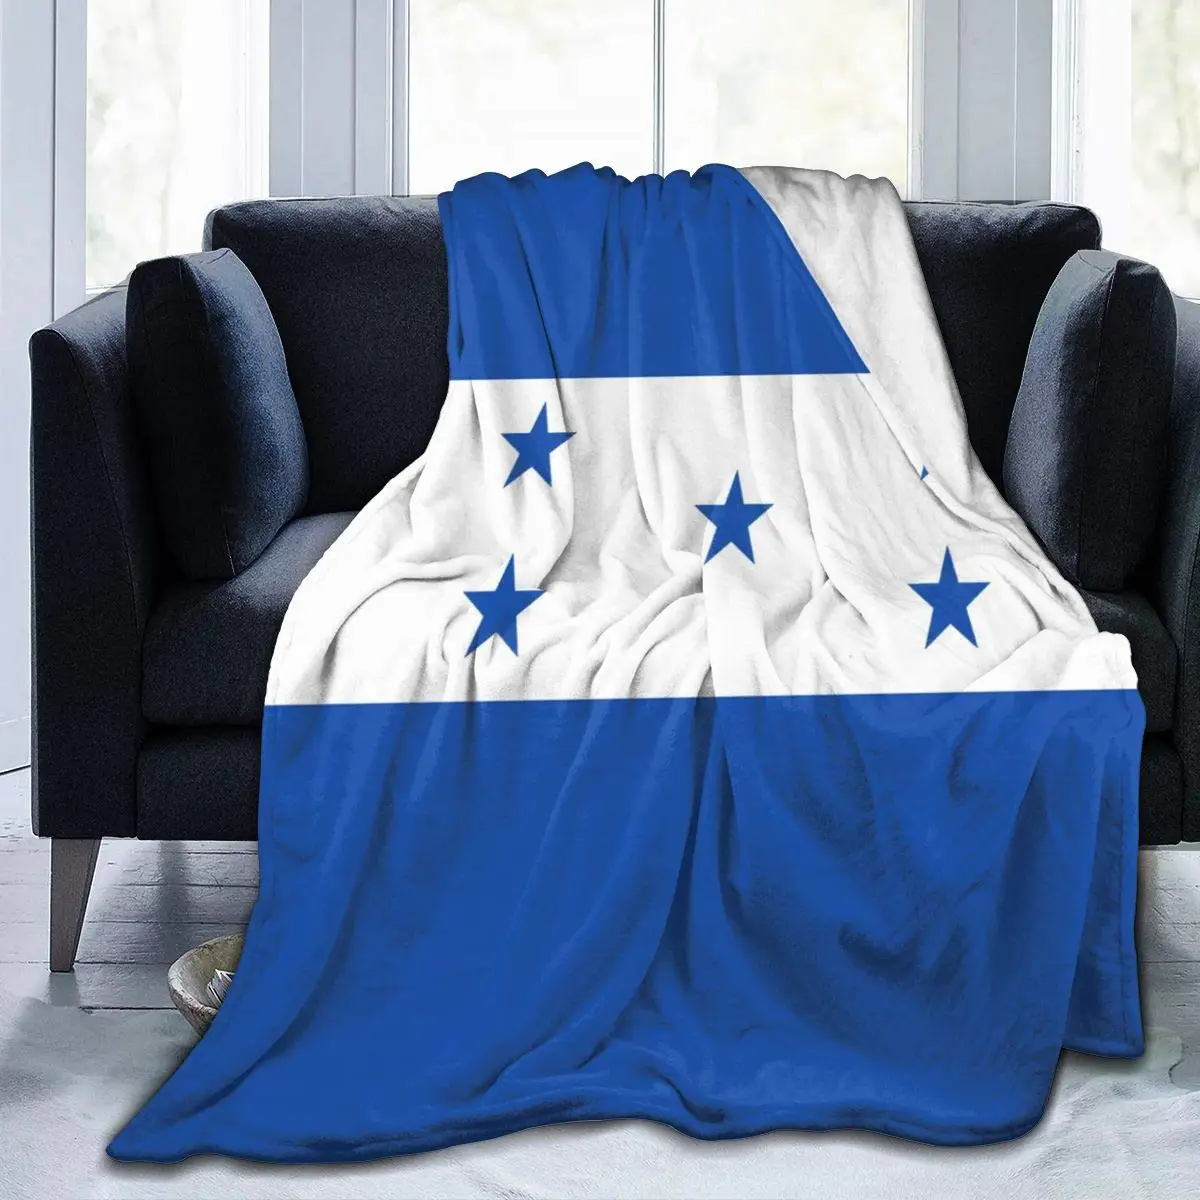 

Honduras Flag Sherpa Blanket Comfy Bed Blanket for Family Festival Gifts, Cozy Flannel Throw Blankets Durable Warm Sofa Blanket